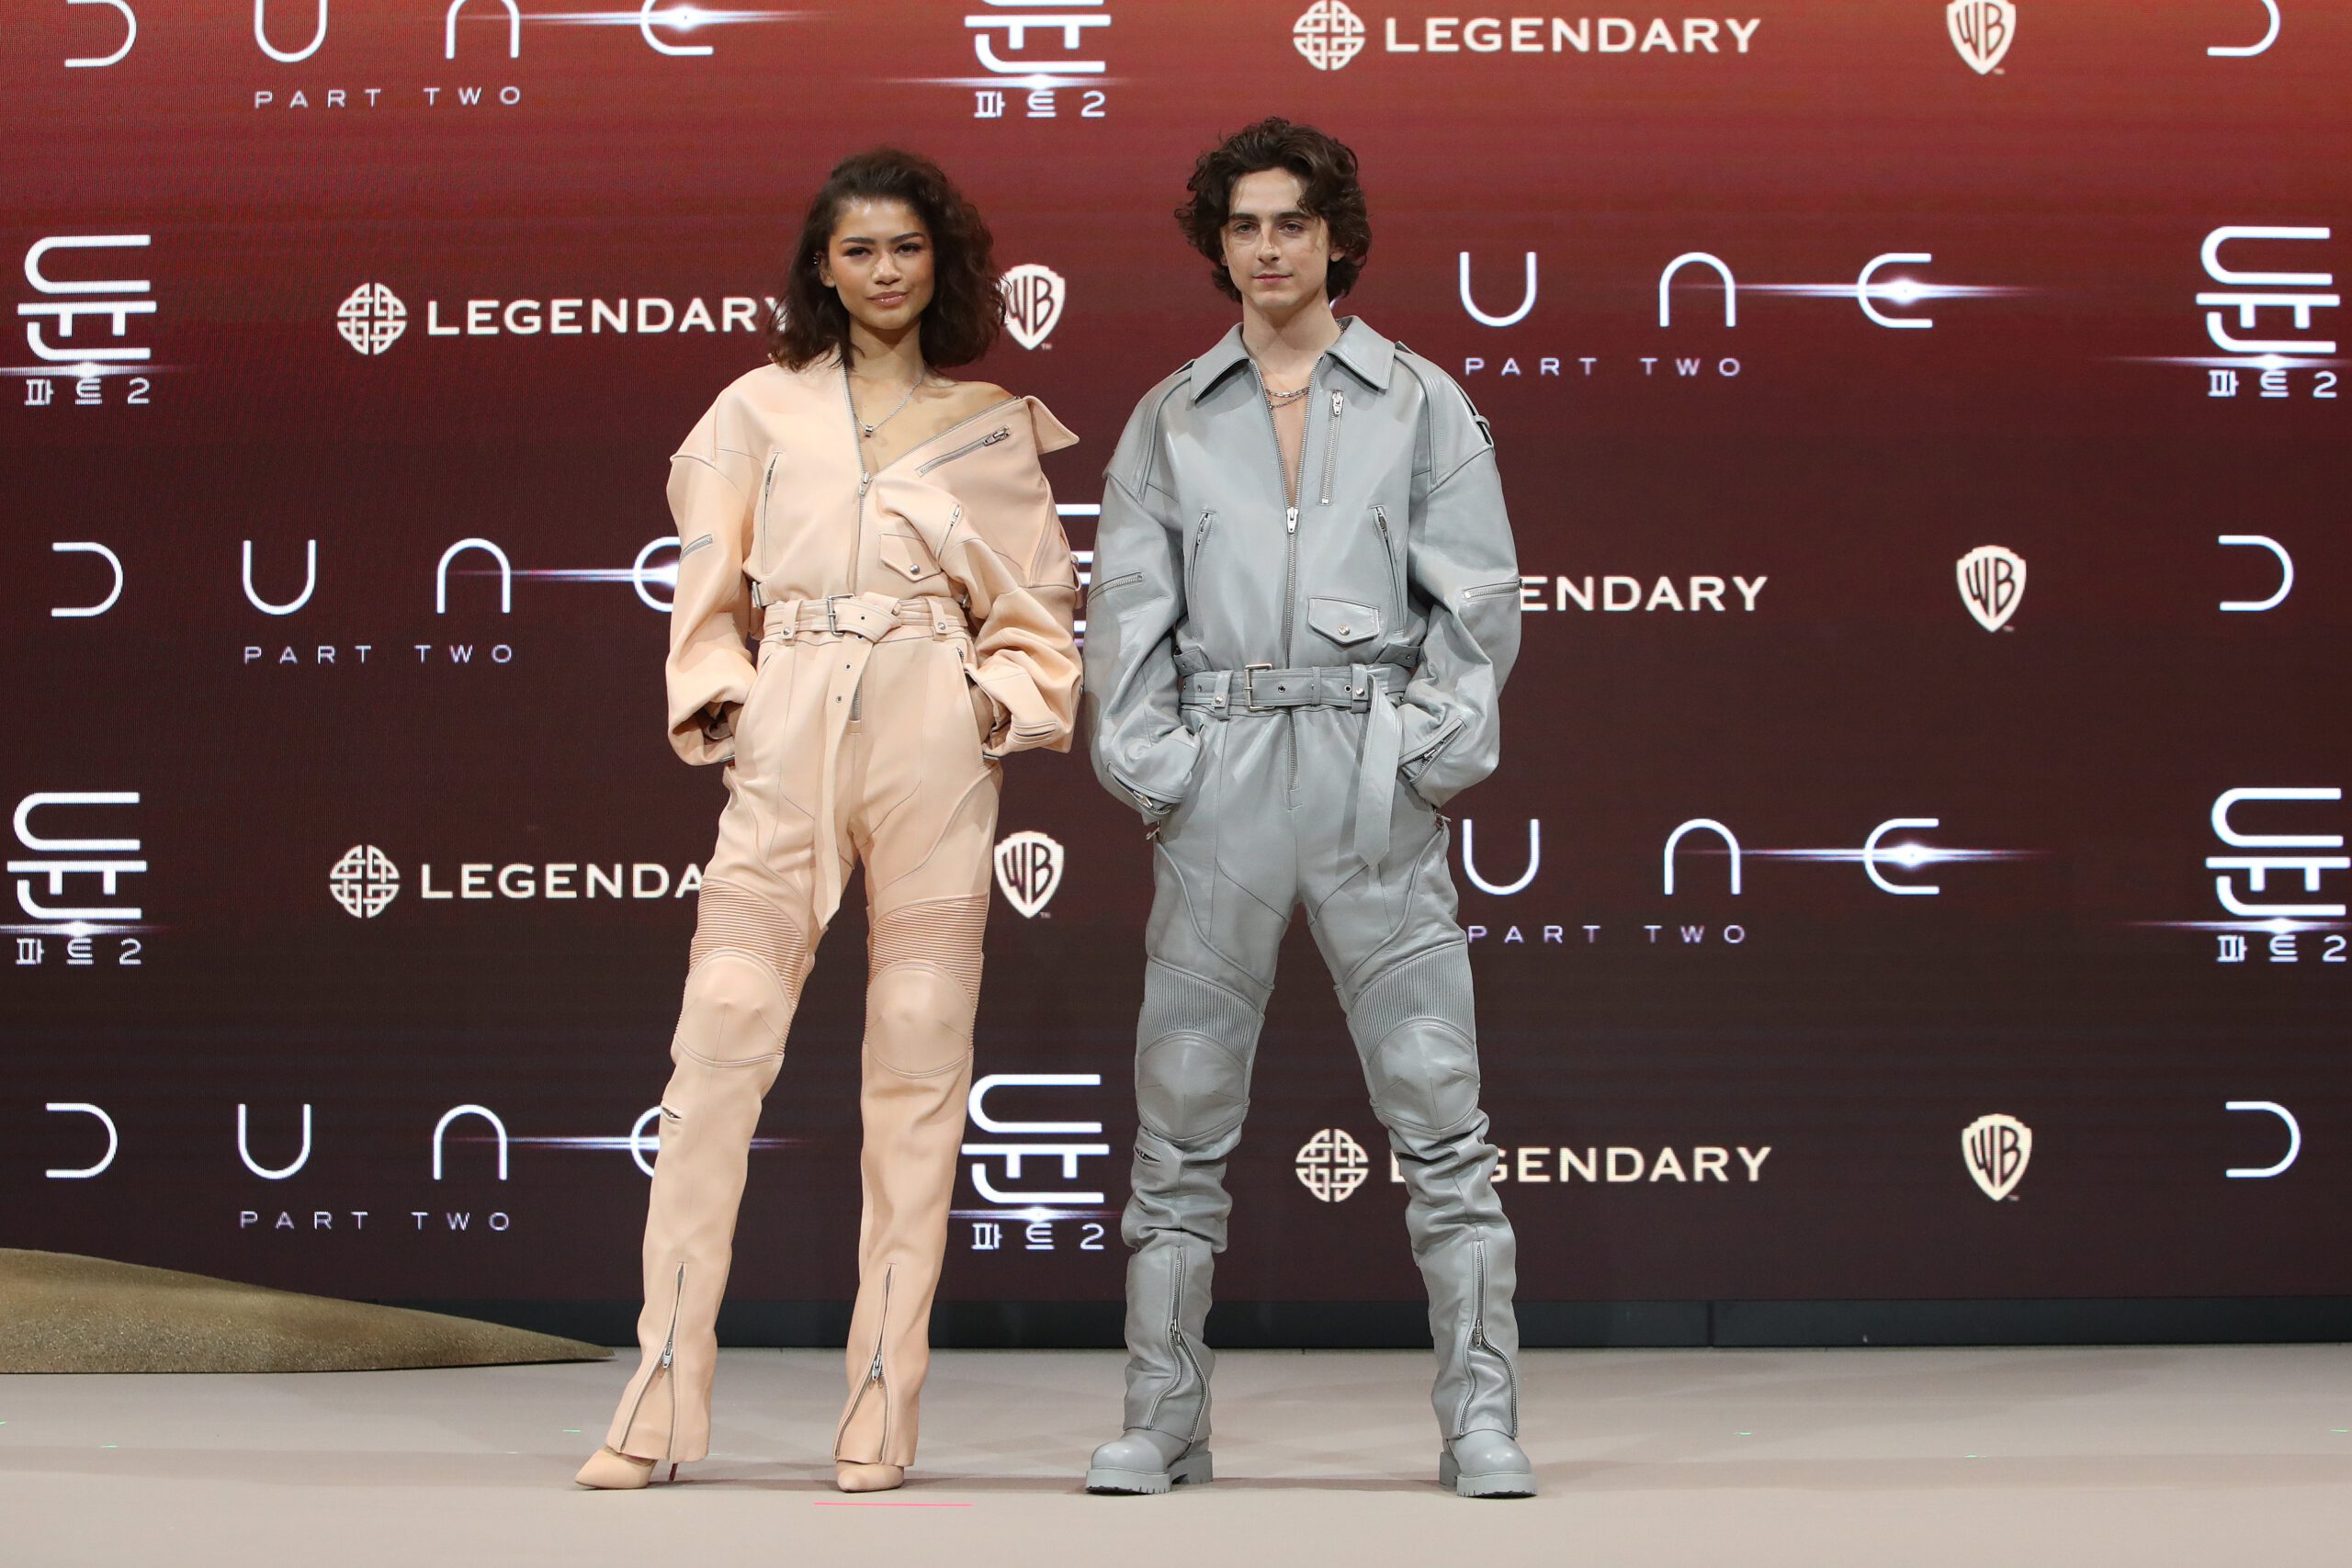 Zendaya and Timothee Chalamet posing in their matching leather coveralls.